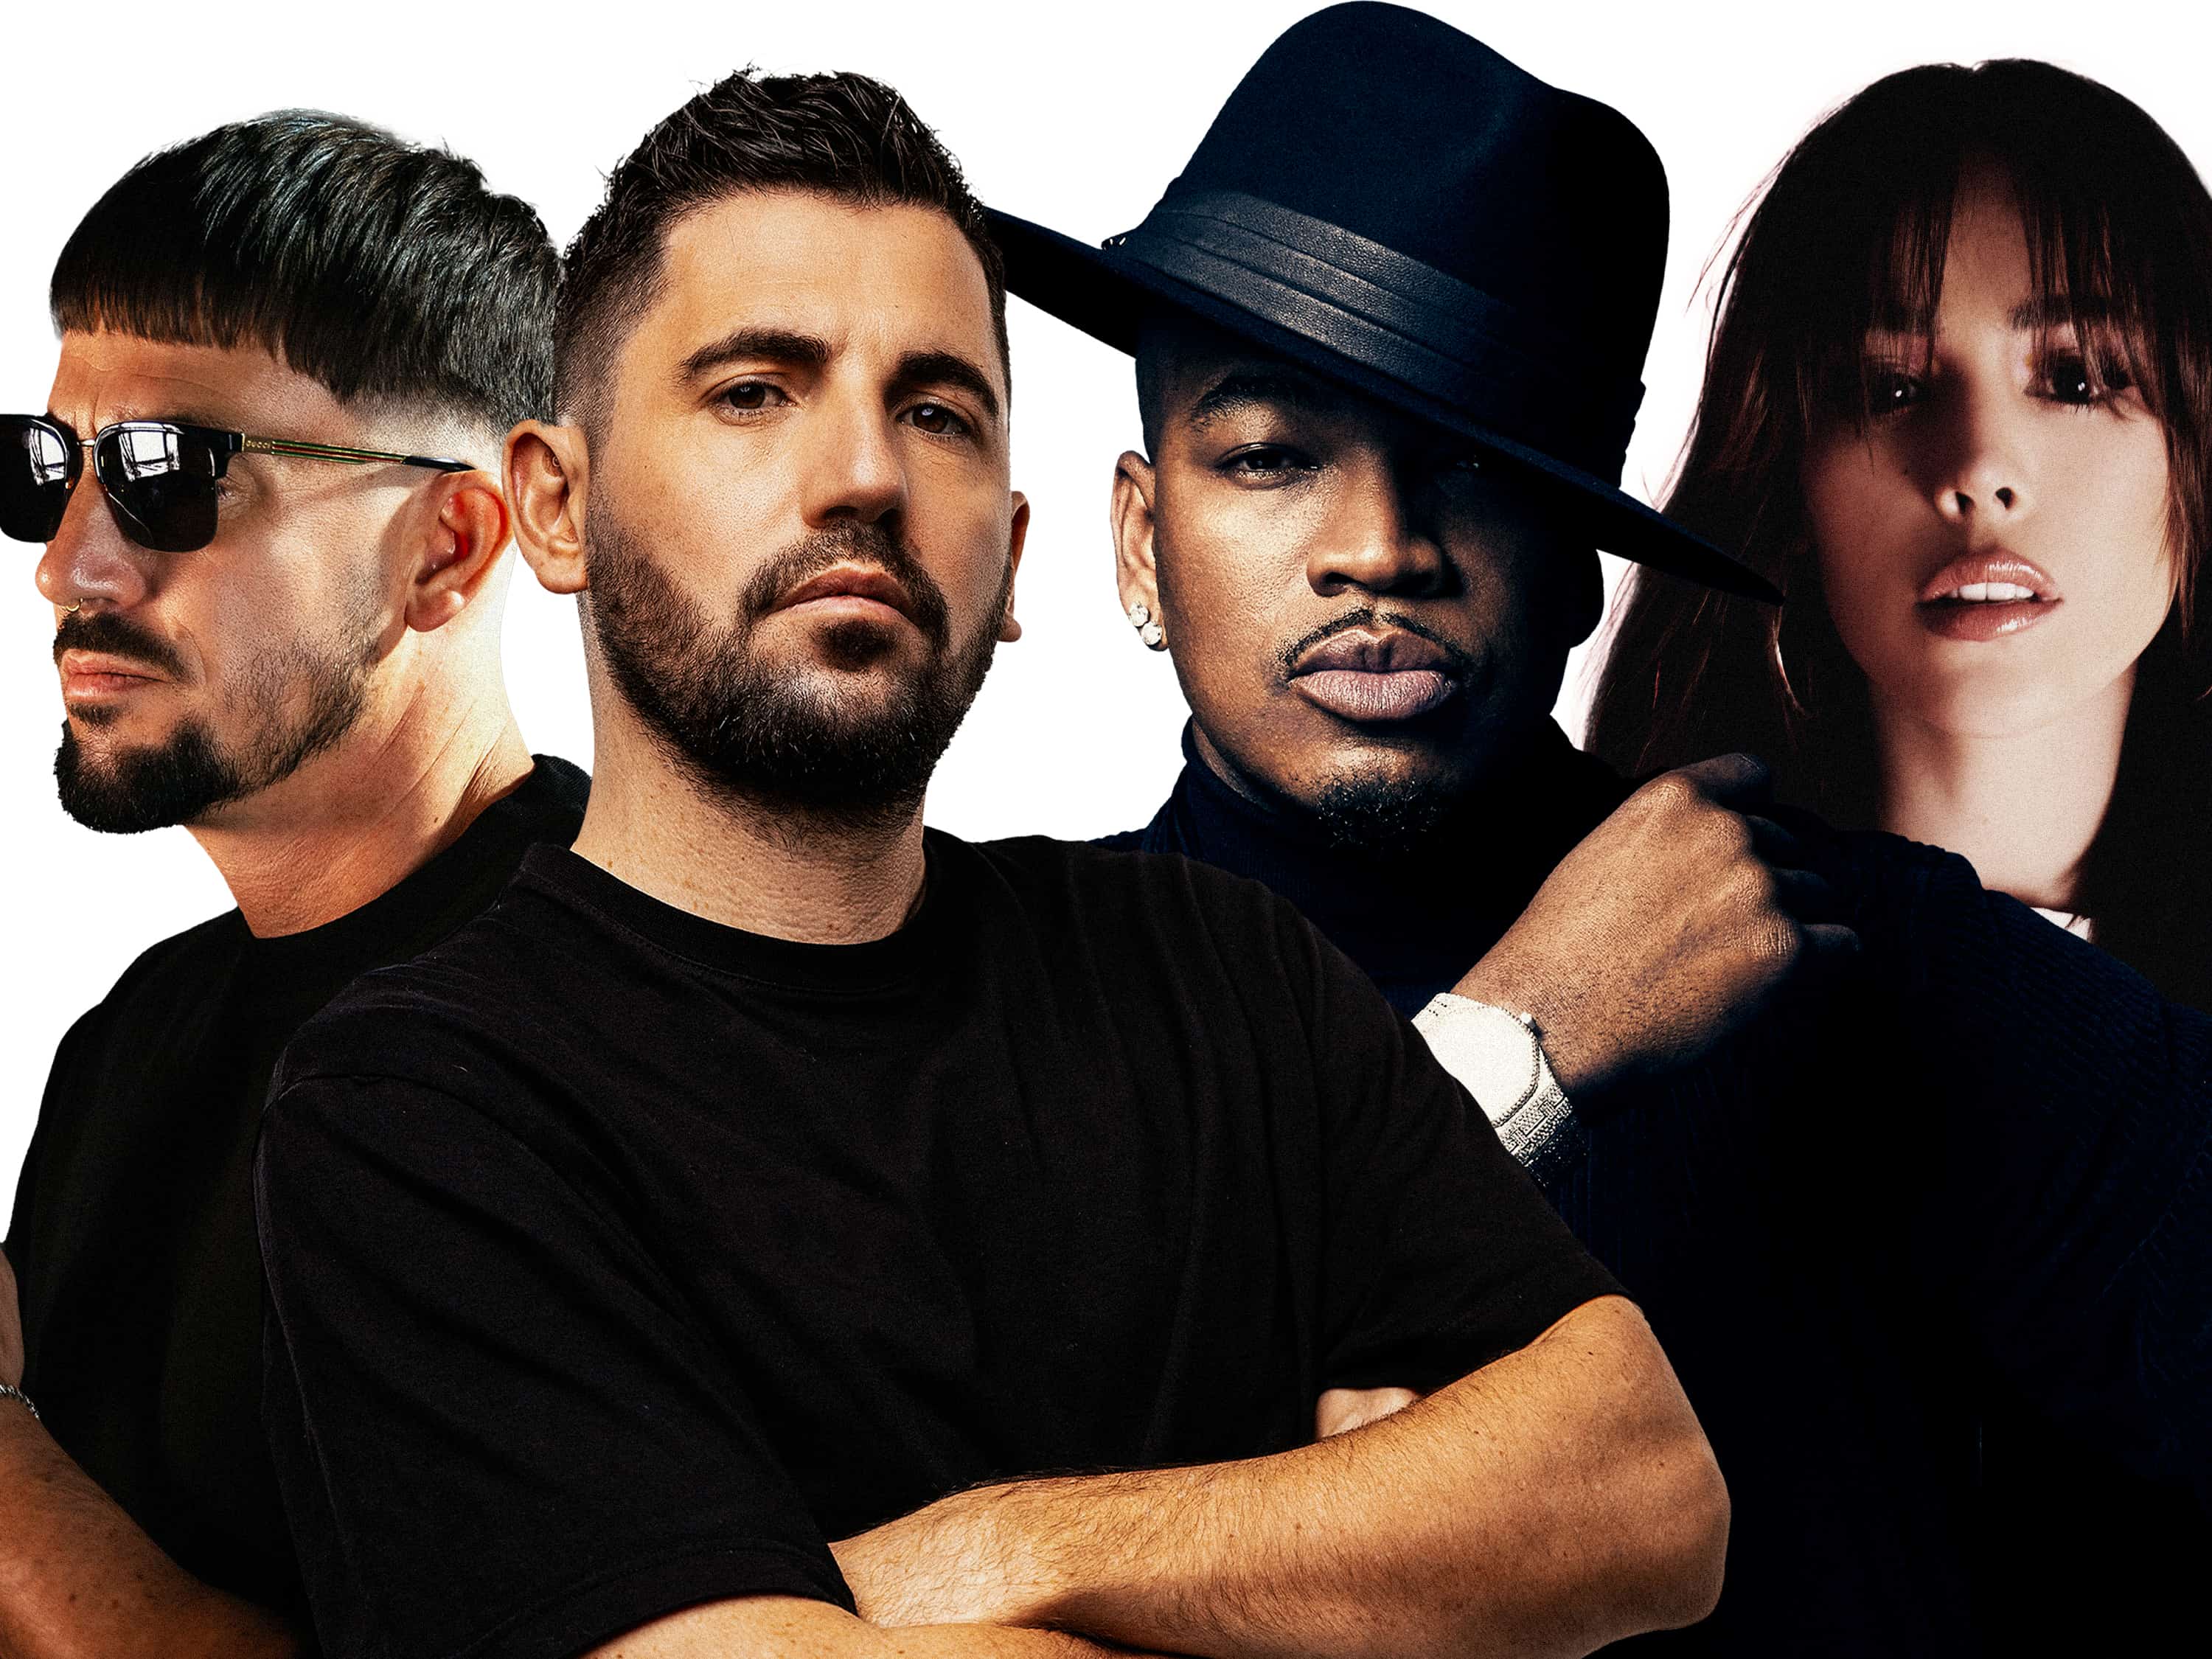 Dimitri Vegas & Like Mike team up with Ne-Yo & Danna Paola for Latin-inspired track ‘Mexico’: Listen